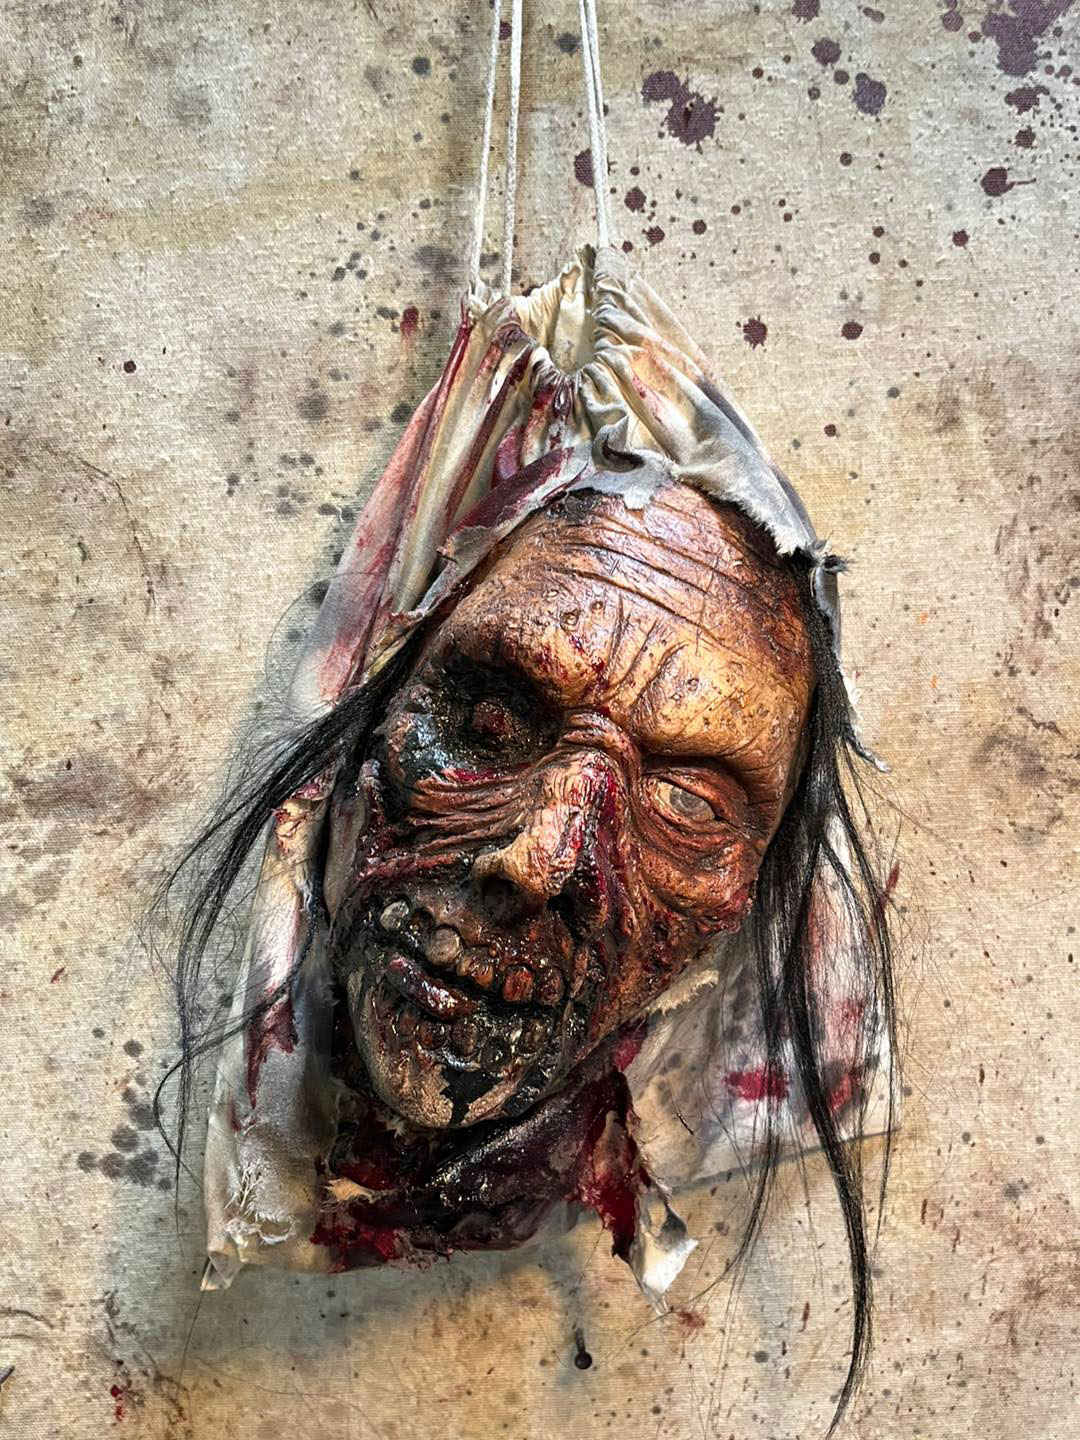 Zombie Head in a Bag